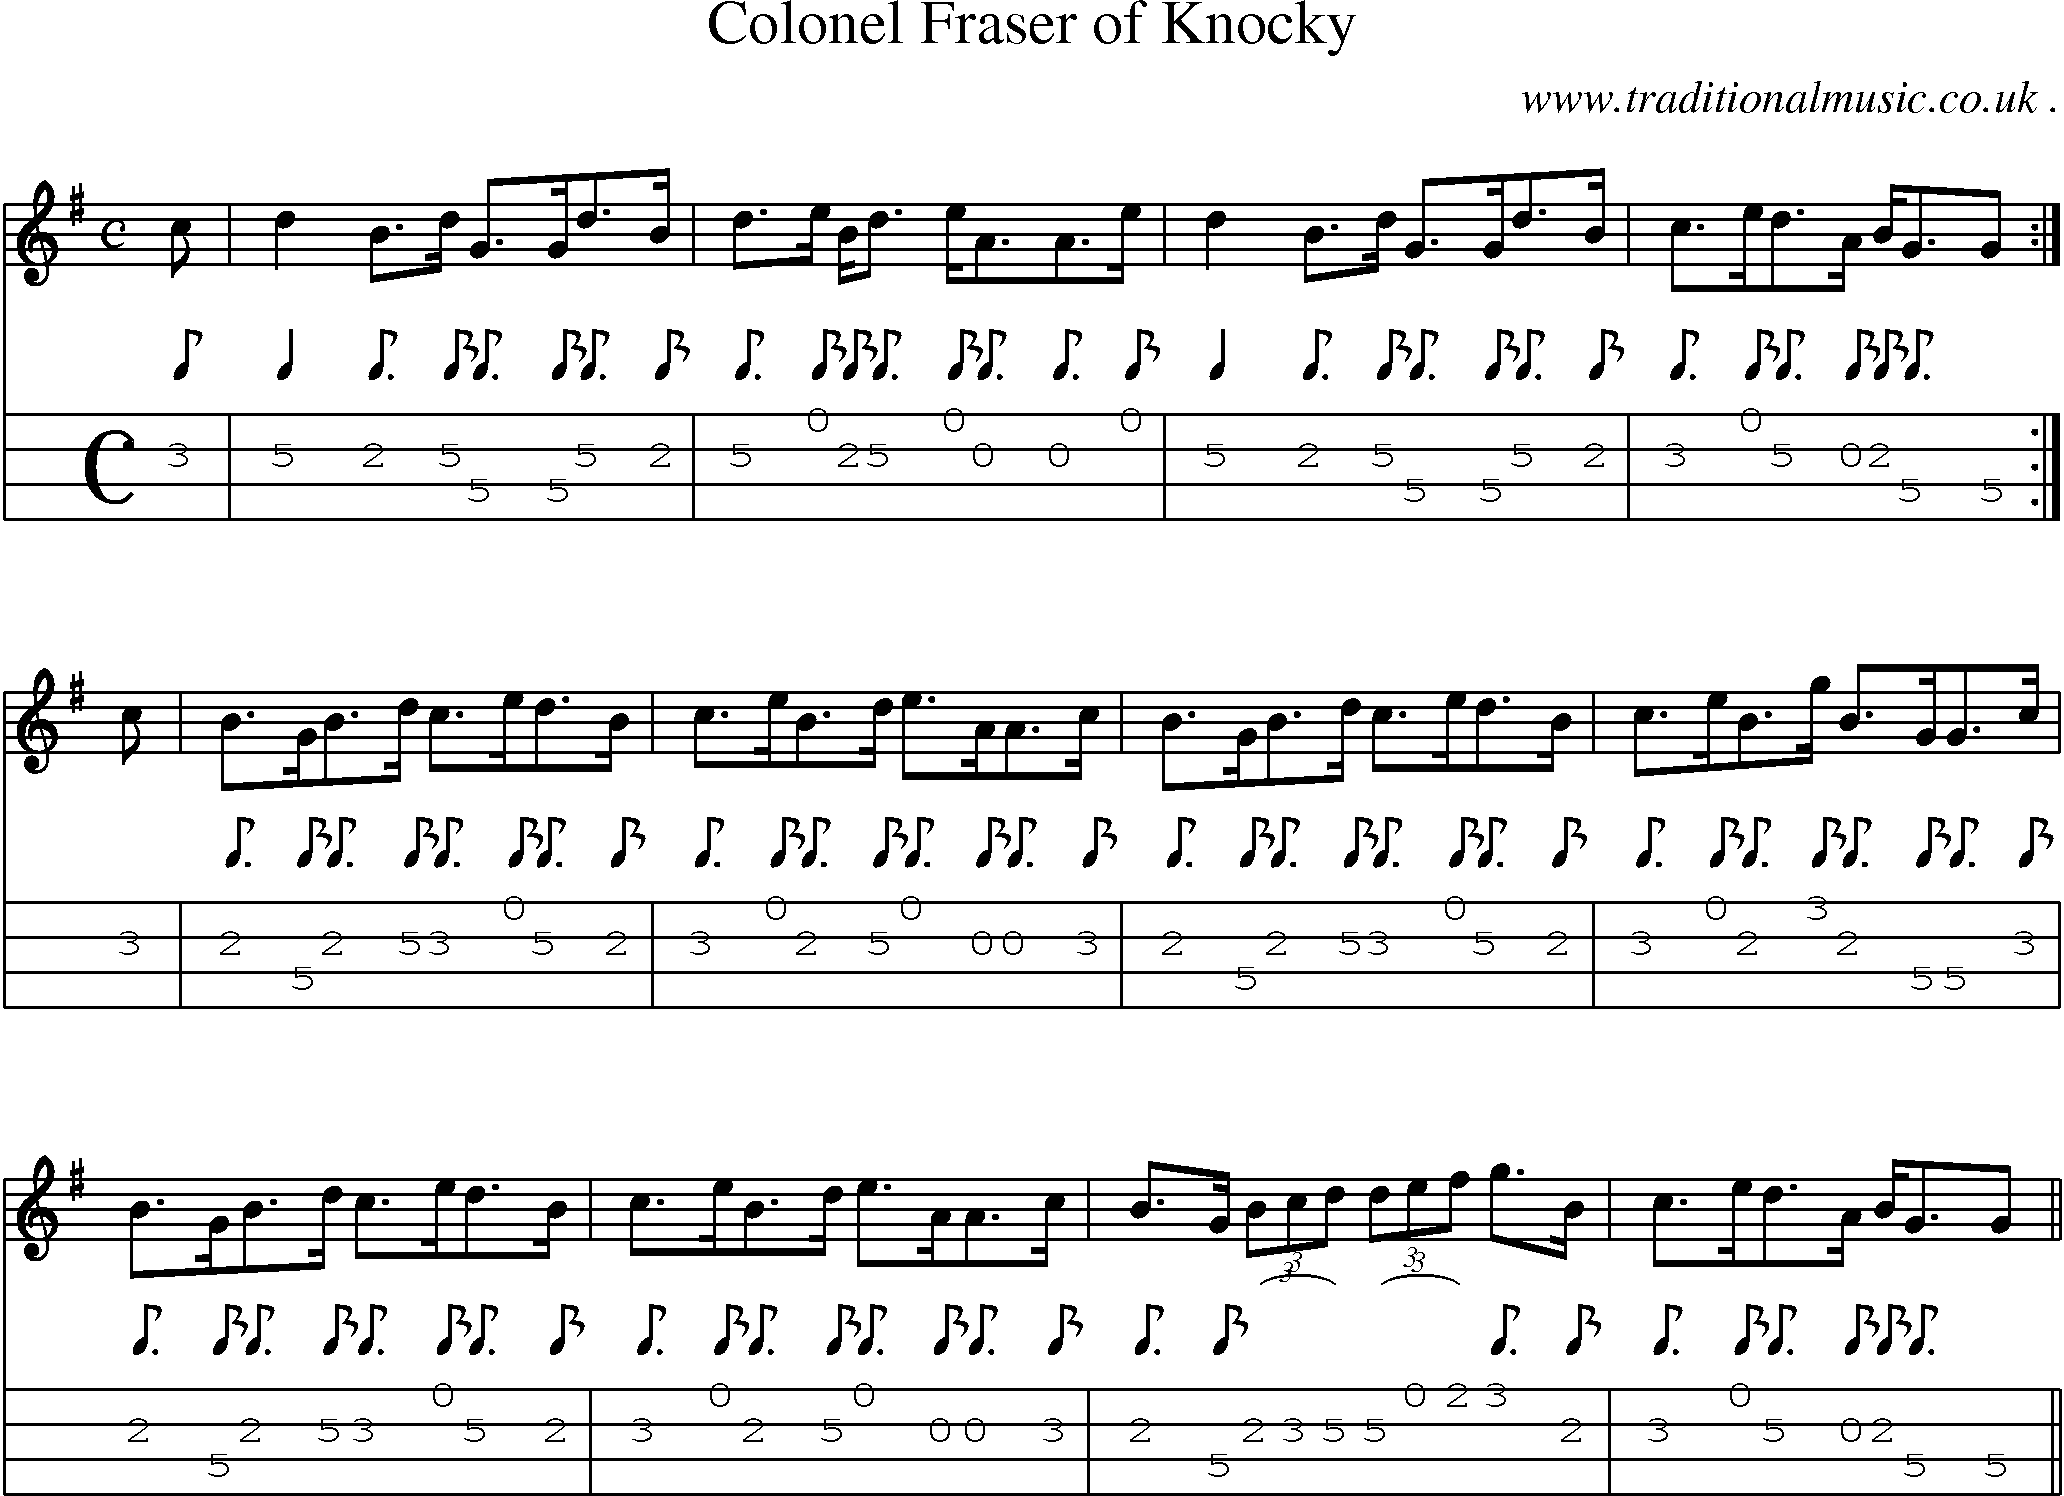 Sheet-music  score, Chords and Mandolin Tabs for Colonel Fraser Of Knocky